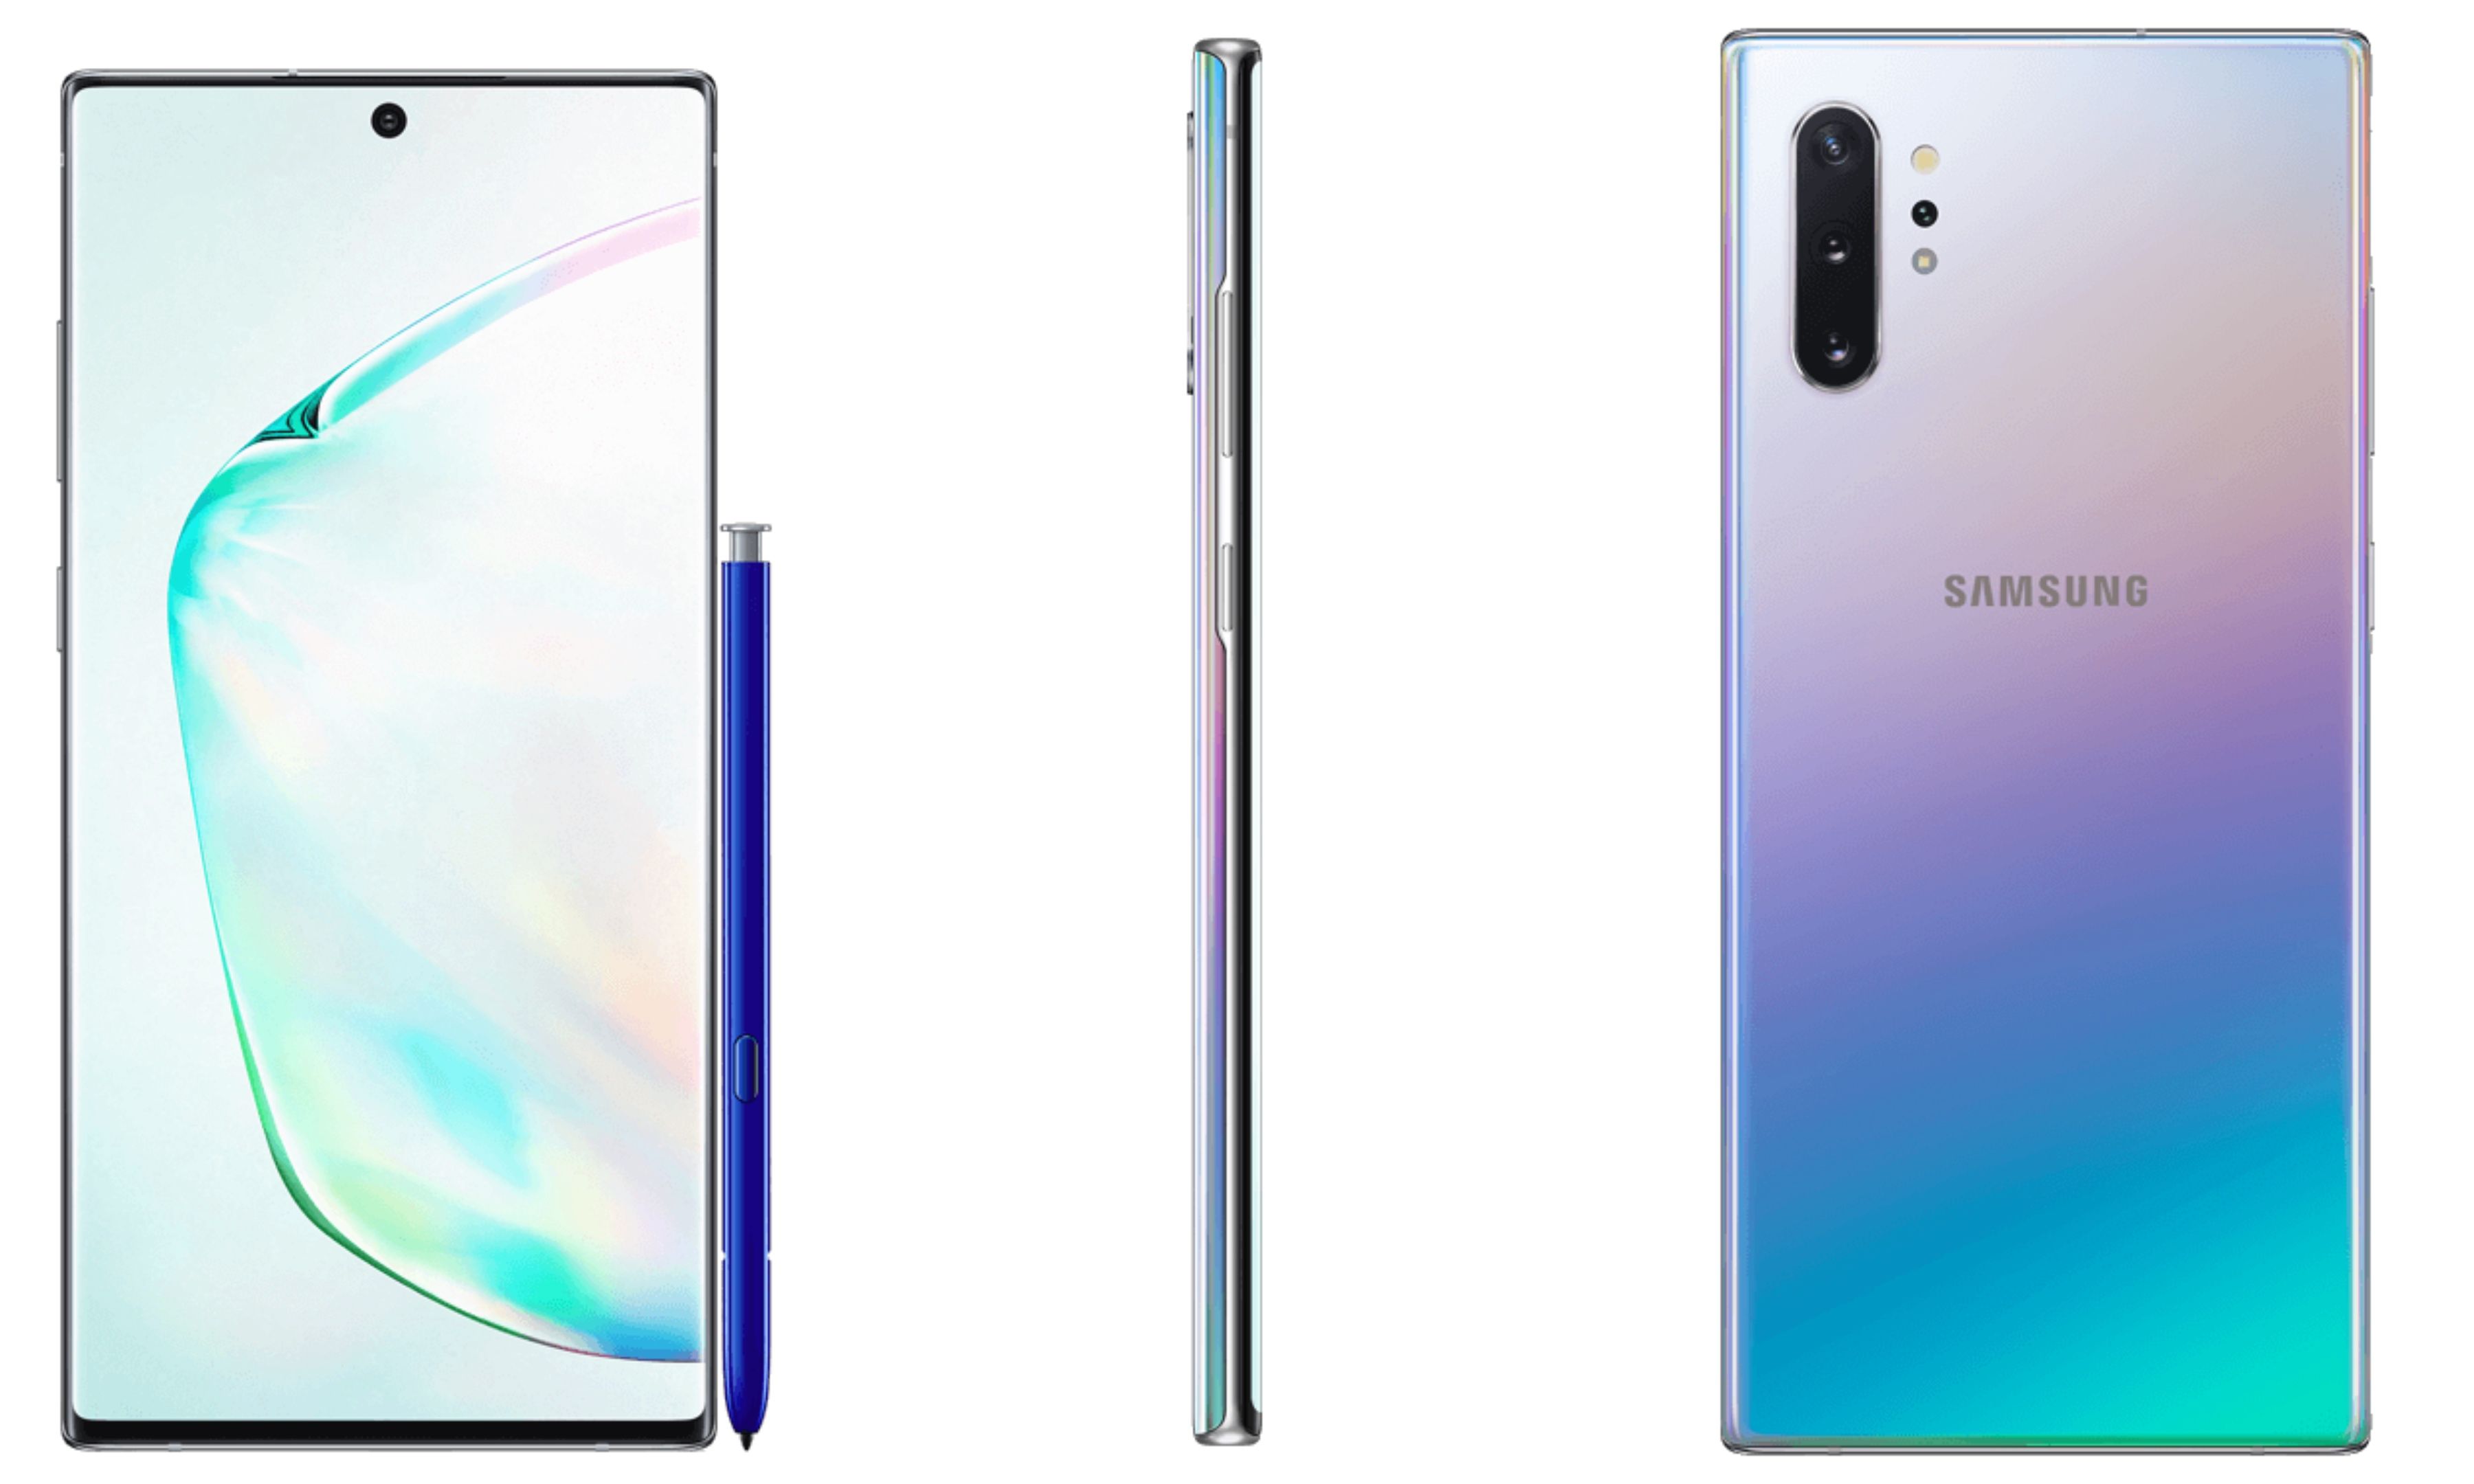 Samsung Galaxy Note 10 Plus Price in India, Samsung Galaxy Note 10 Plus